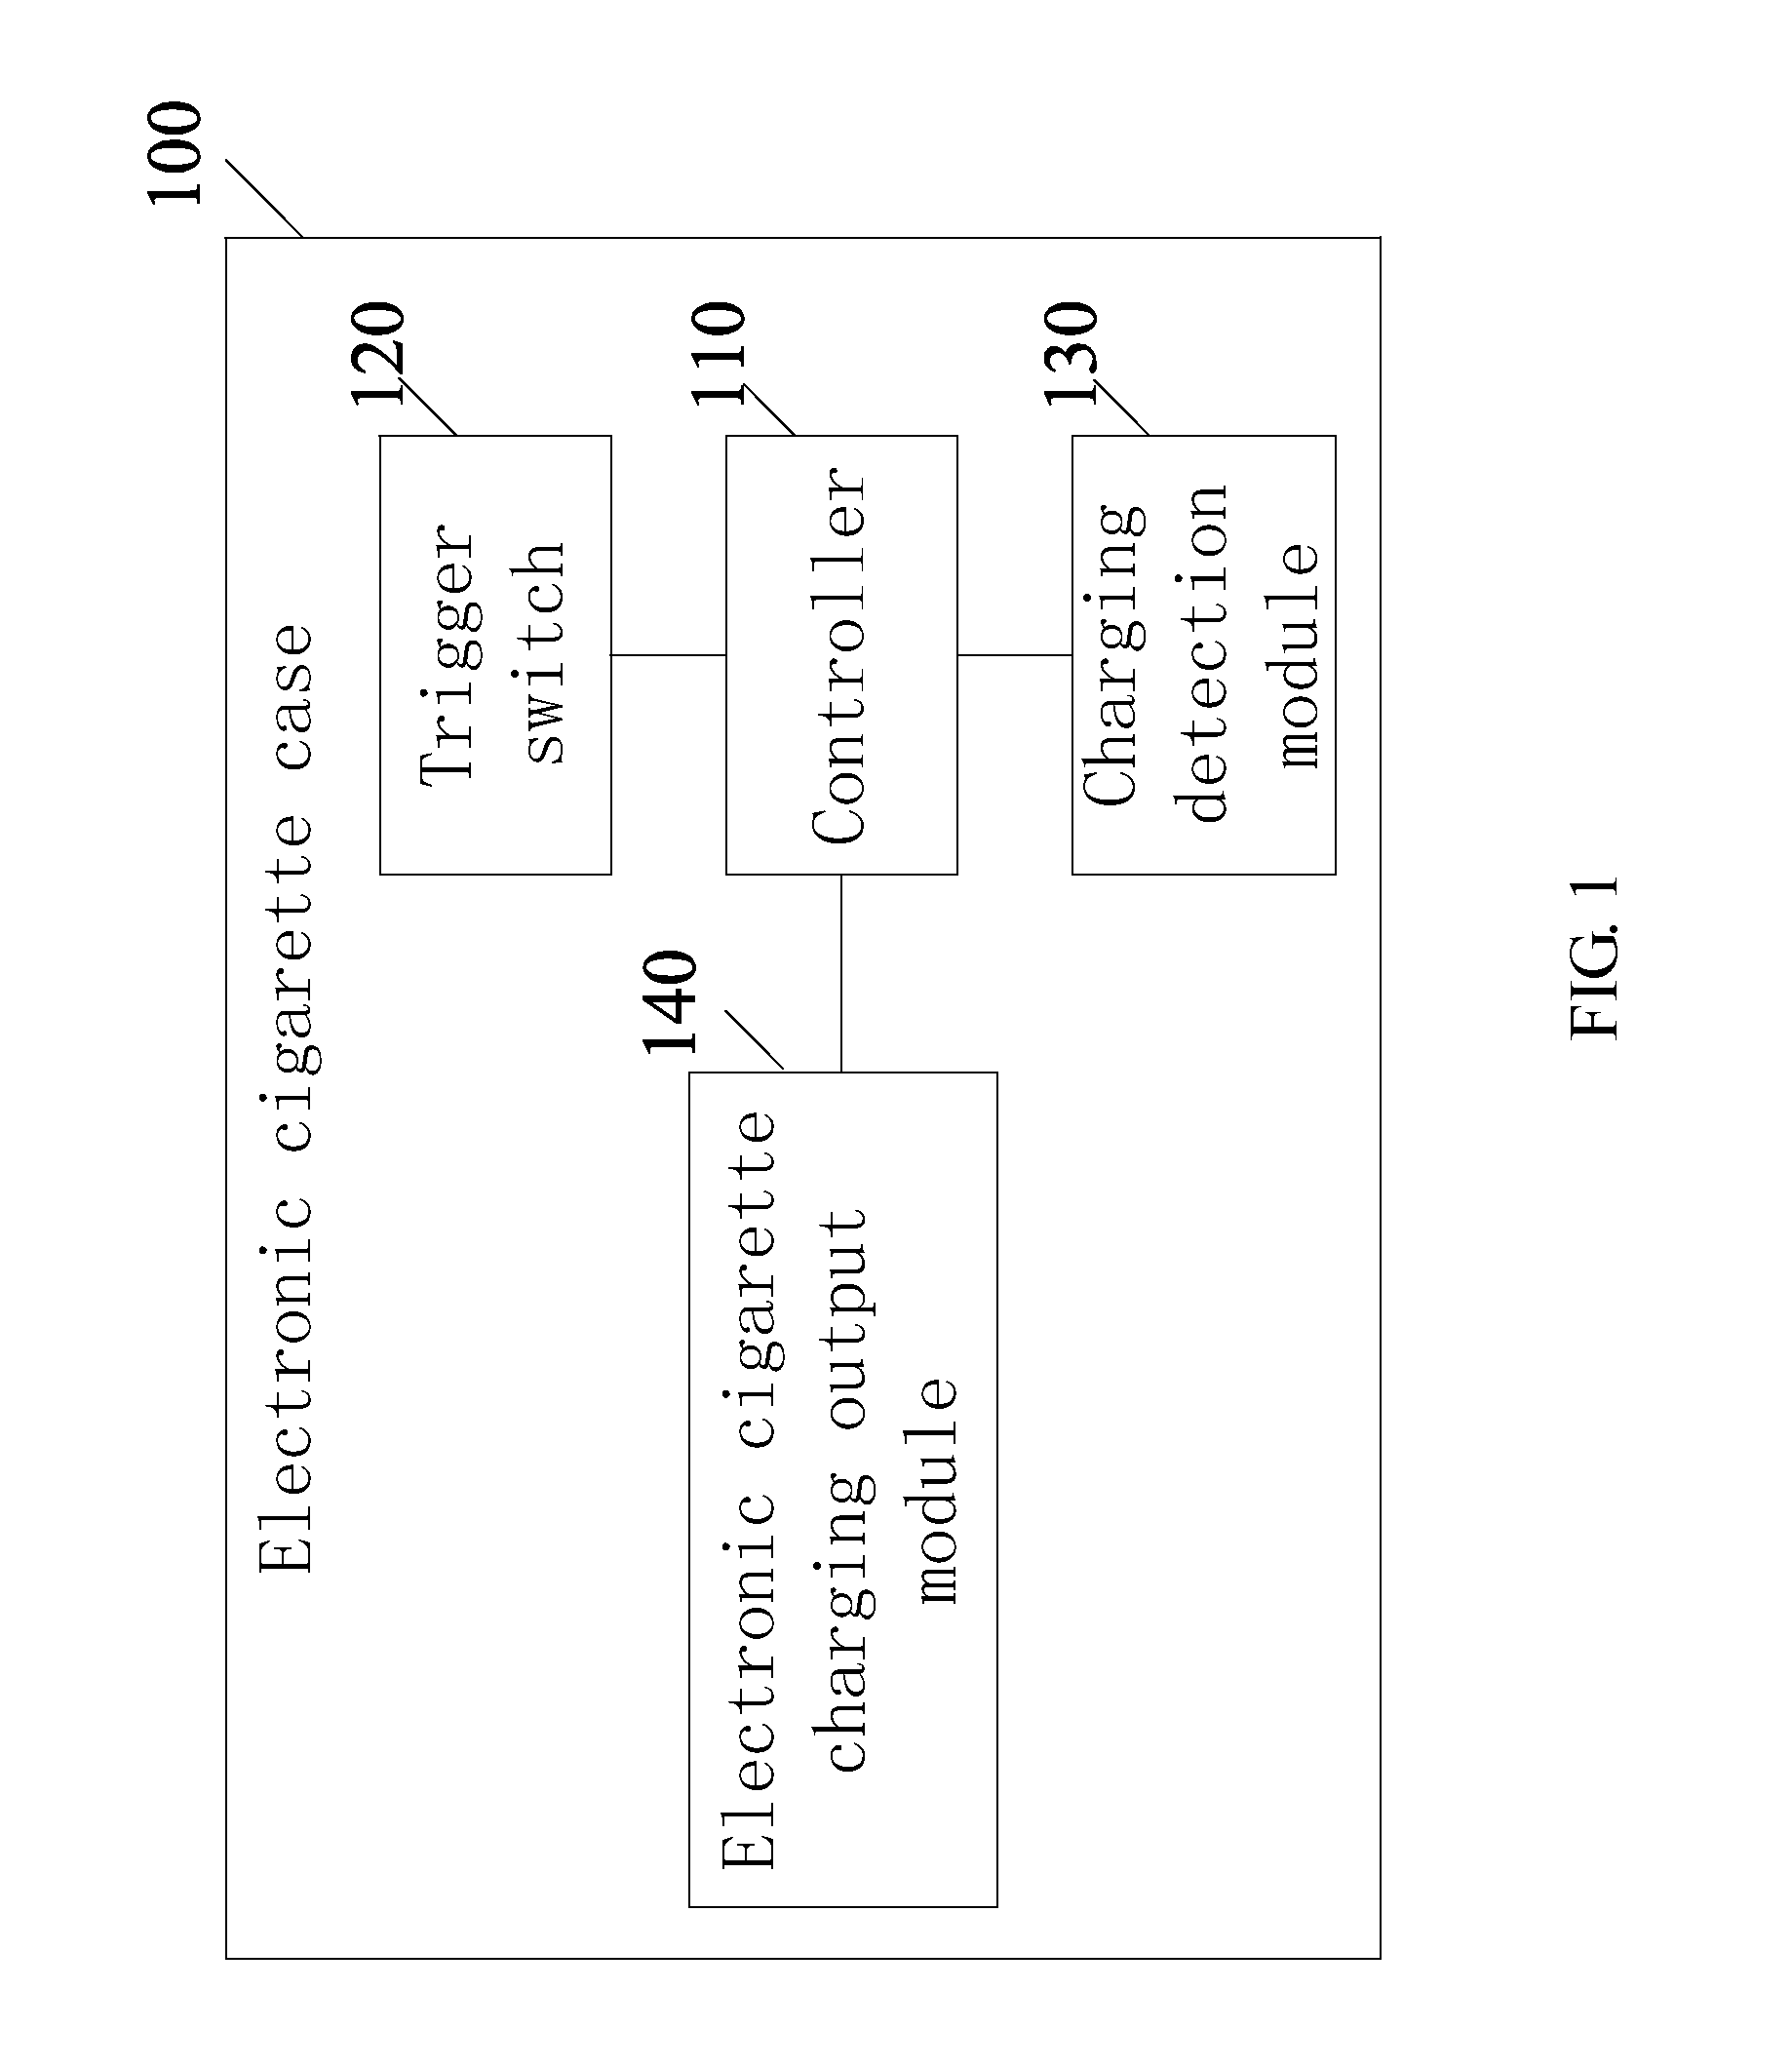 Electronic cigarette case and method for charging an electronic cigarette through it